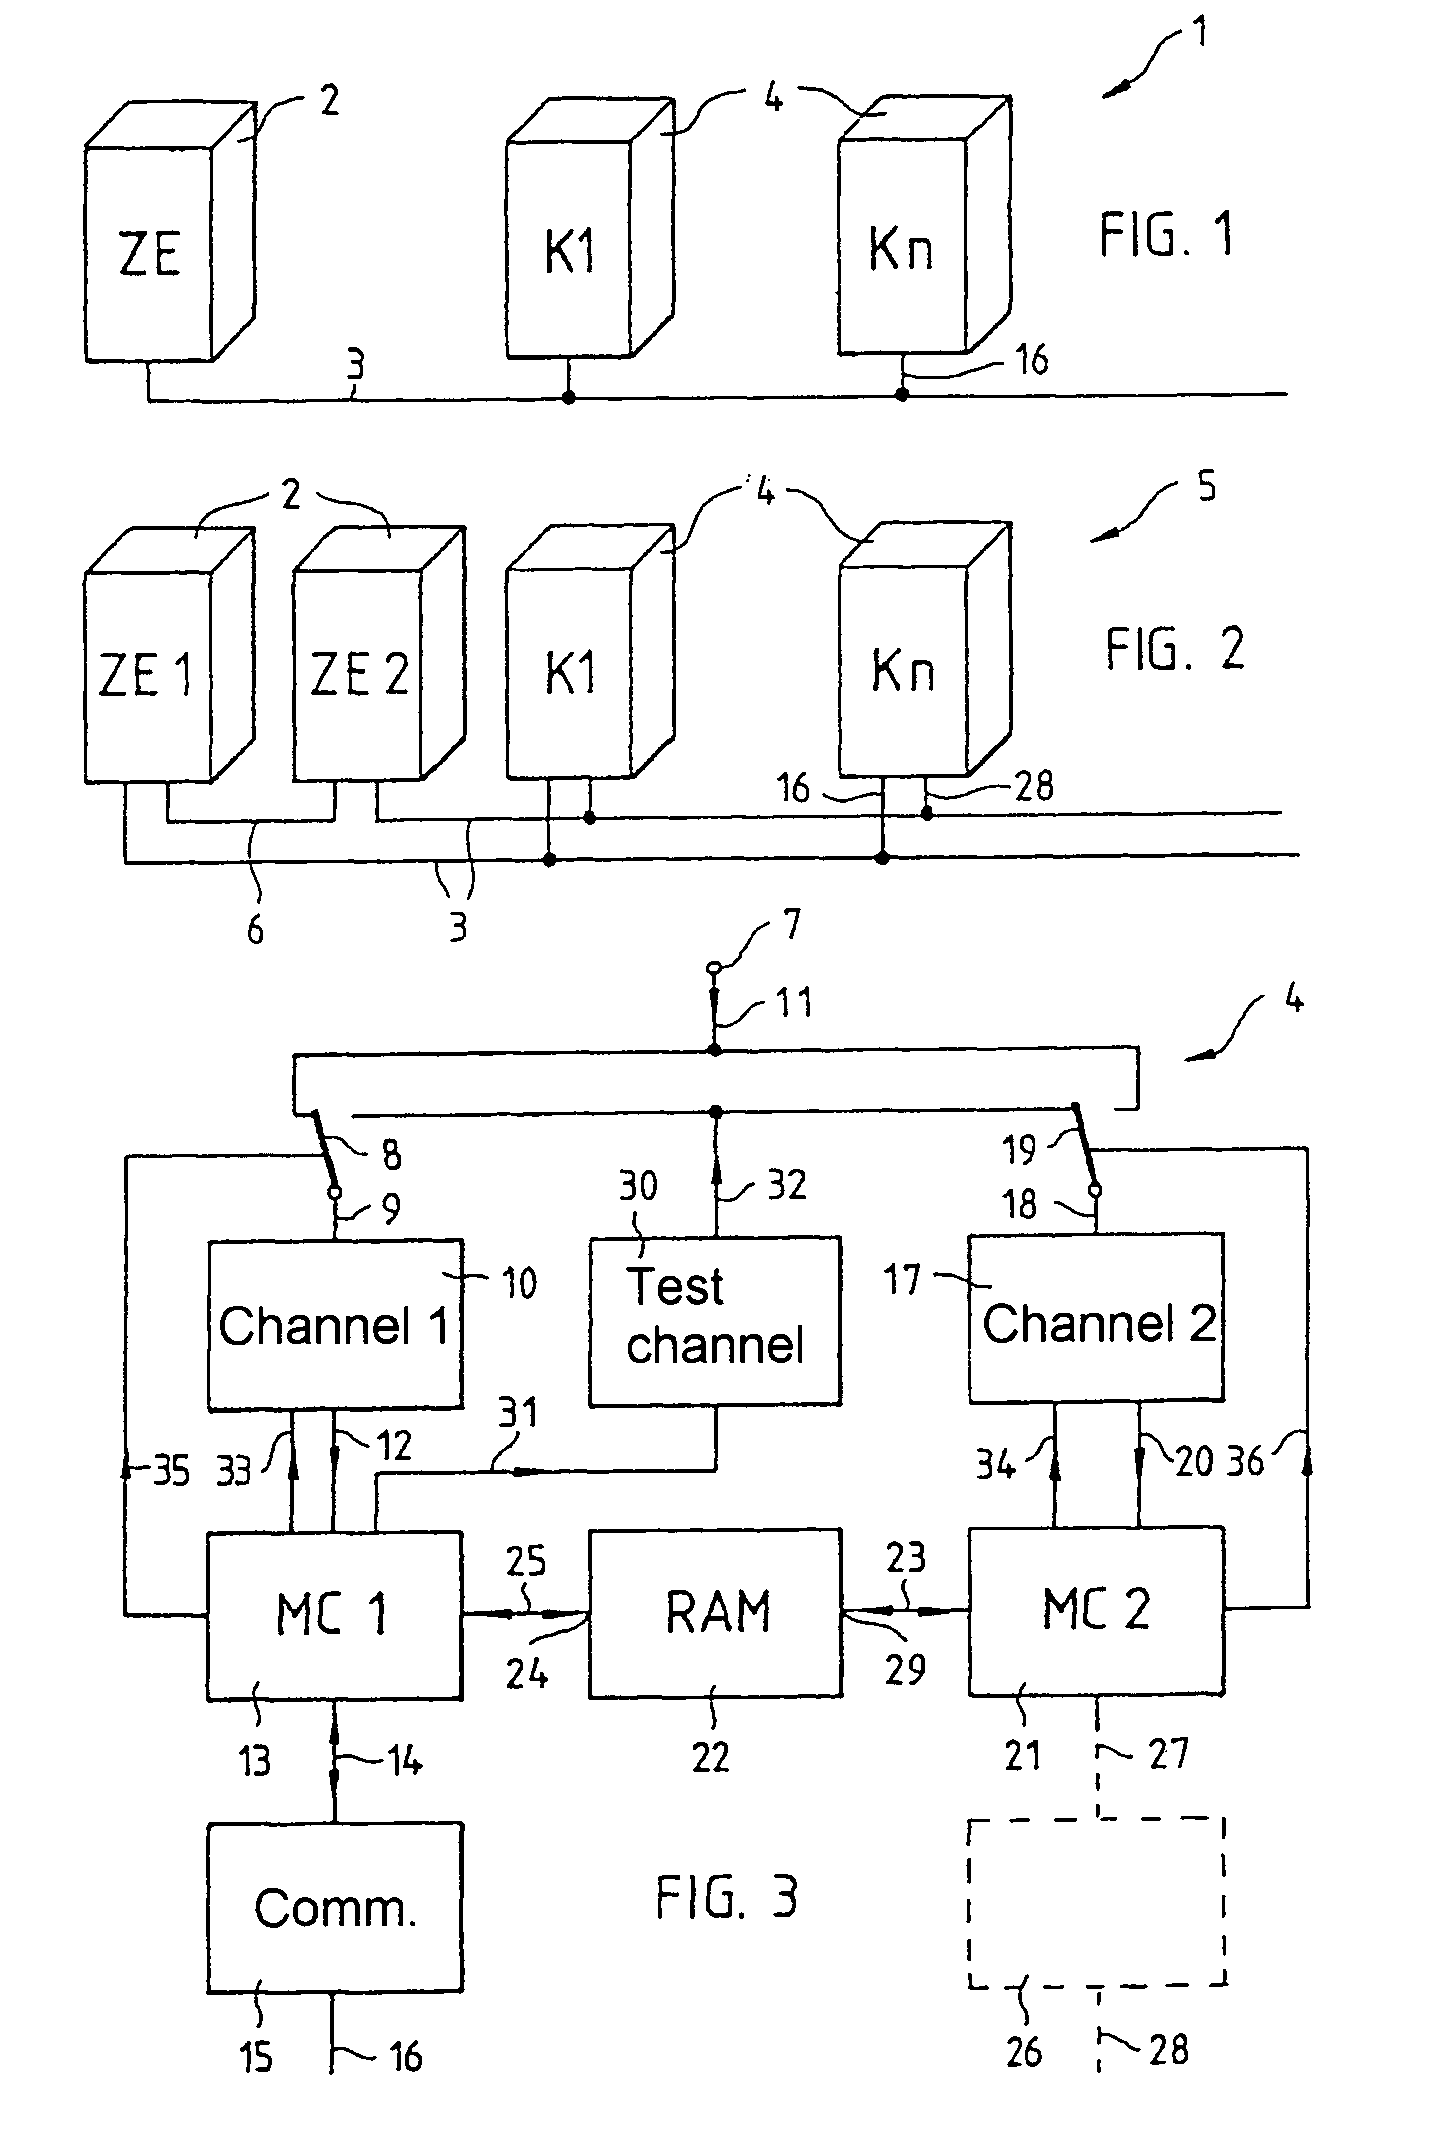 Peripheral component with high error protection for stored programmable controls